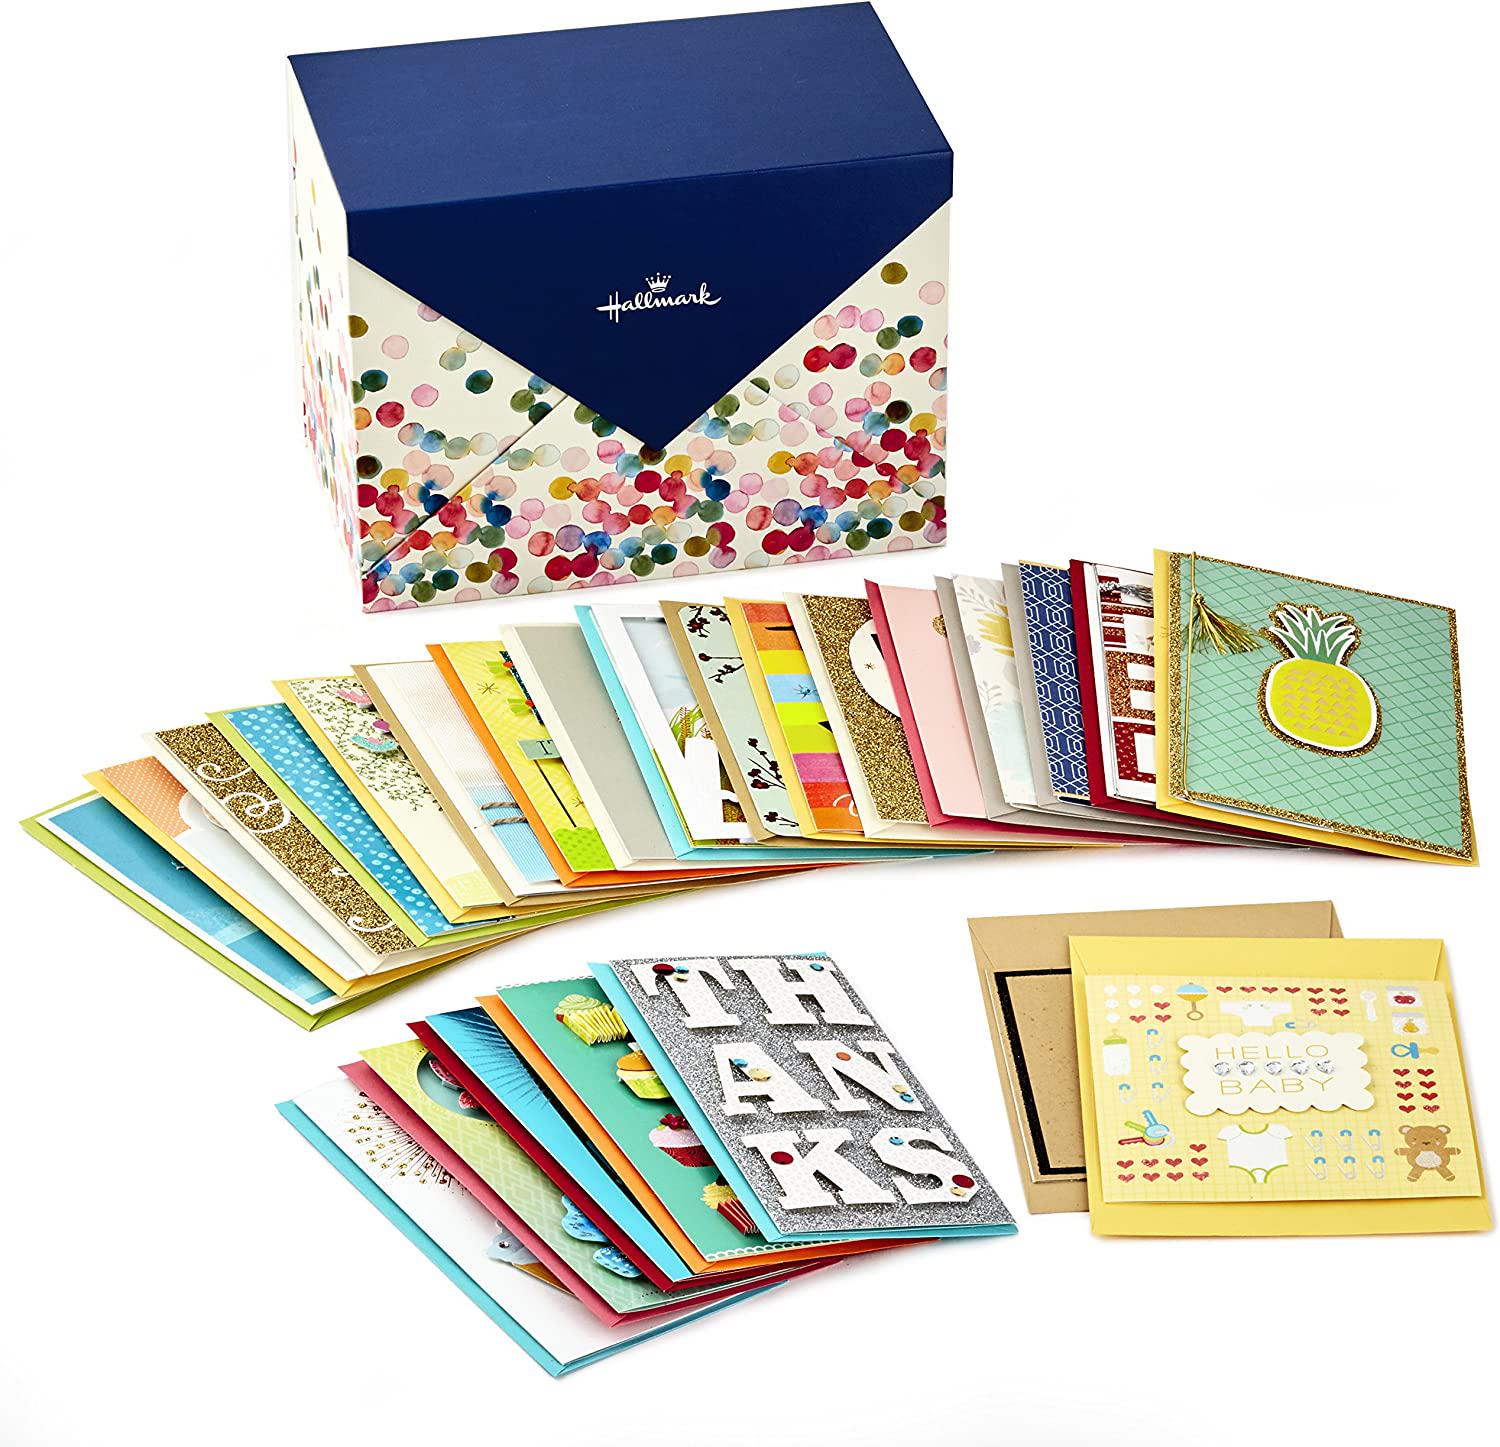 Hallmark, Hallmark 5EDX3456 All Occasion Handmade Boxed Set of Assorted Greeting Cards with Card Organizer (Pack of 24) Birthday, Baby, Wedding, Sympathy, Thinking of You, Thank You, Blank, Polka Dot Box